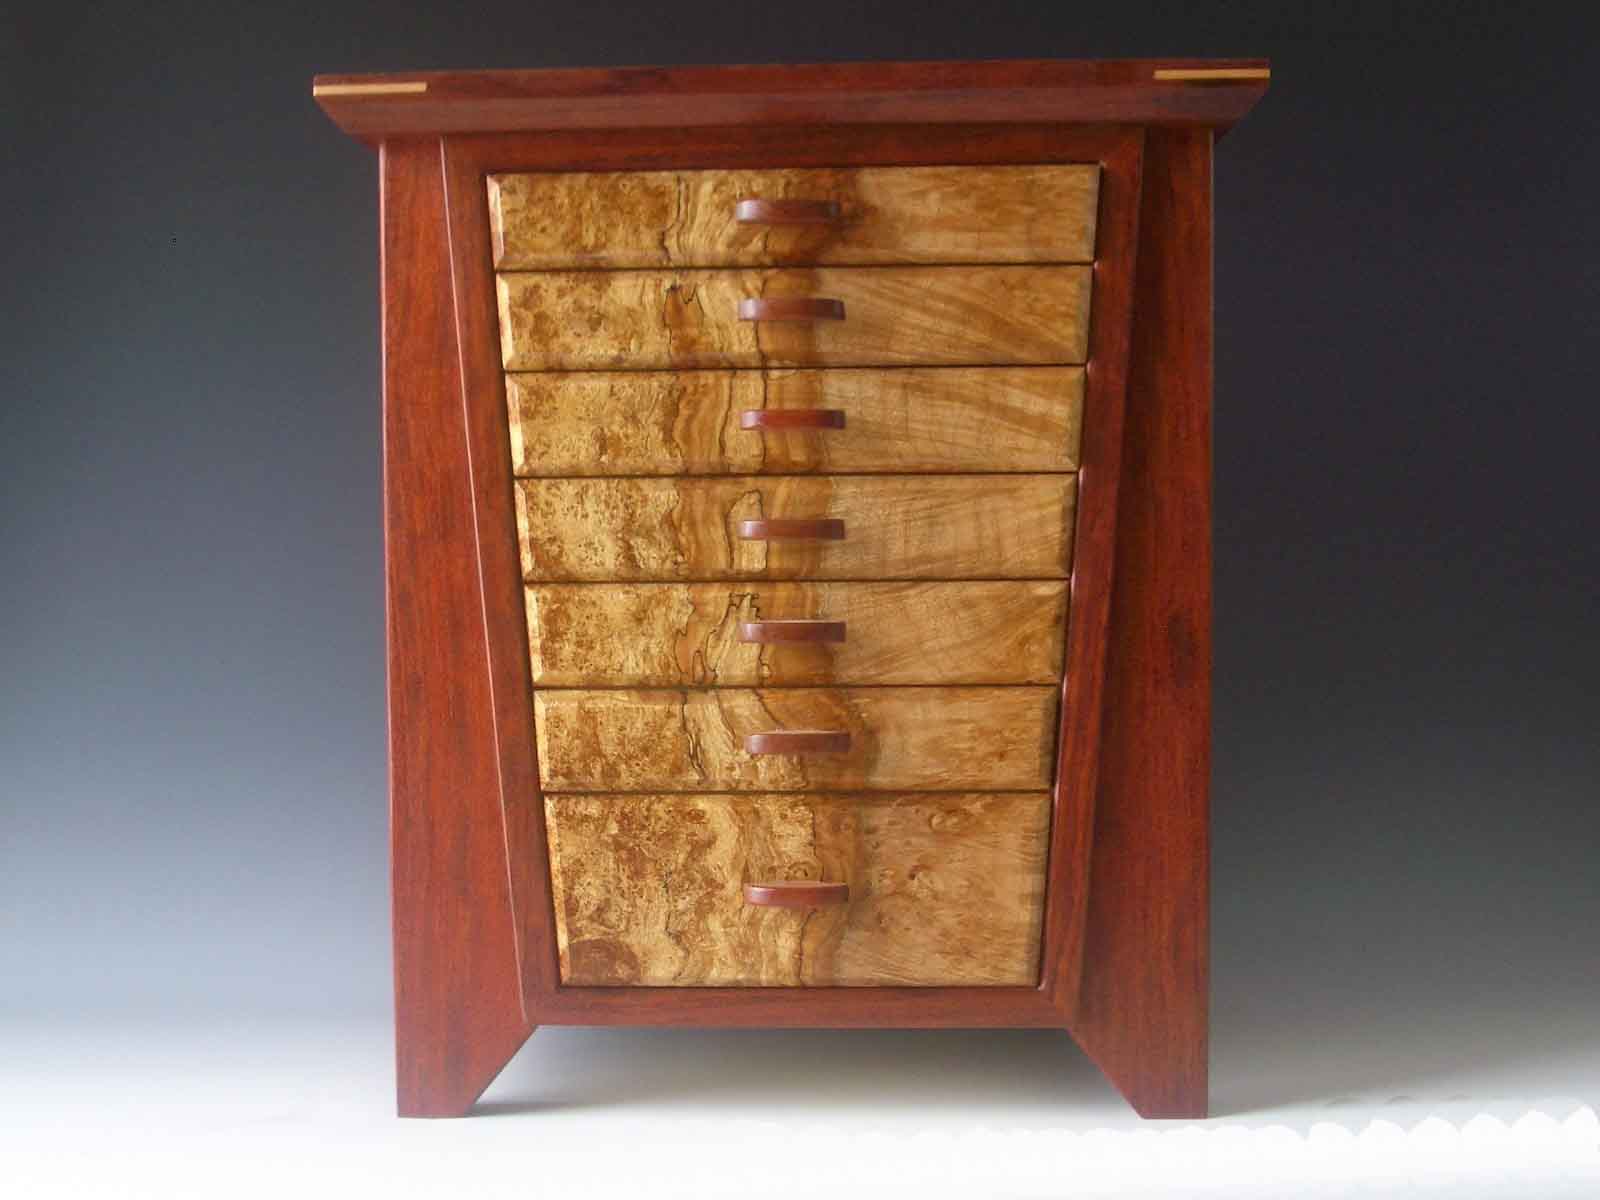 One of my larger handmade jewelry boxes, the Angle, made of bubinga wood from Africa.